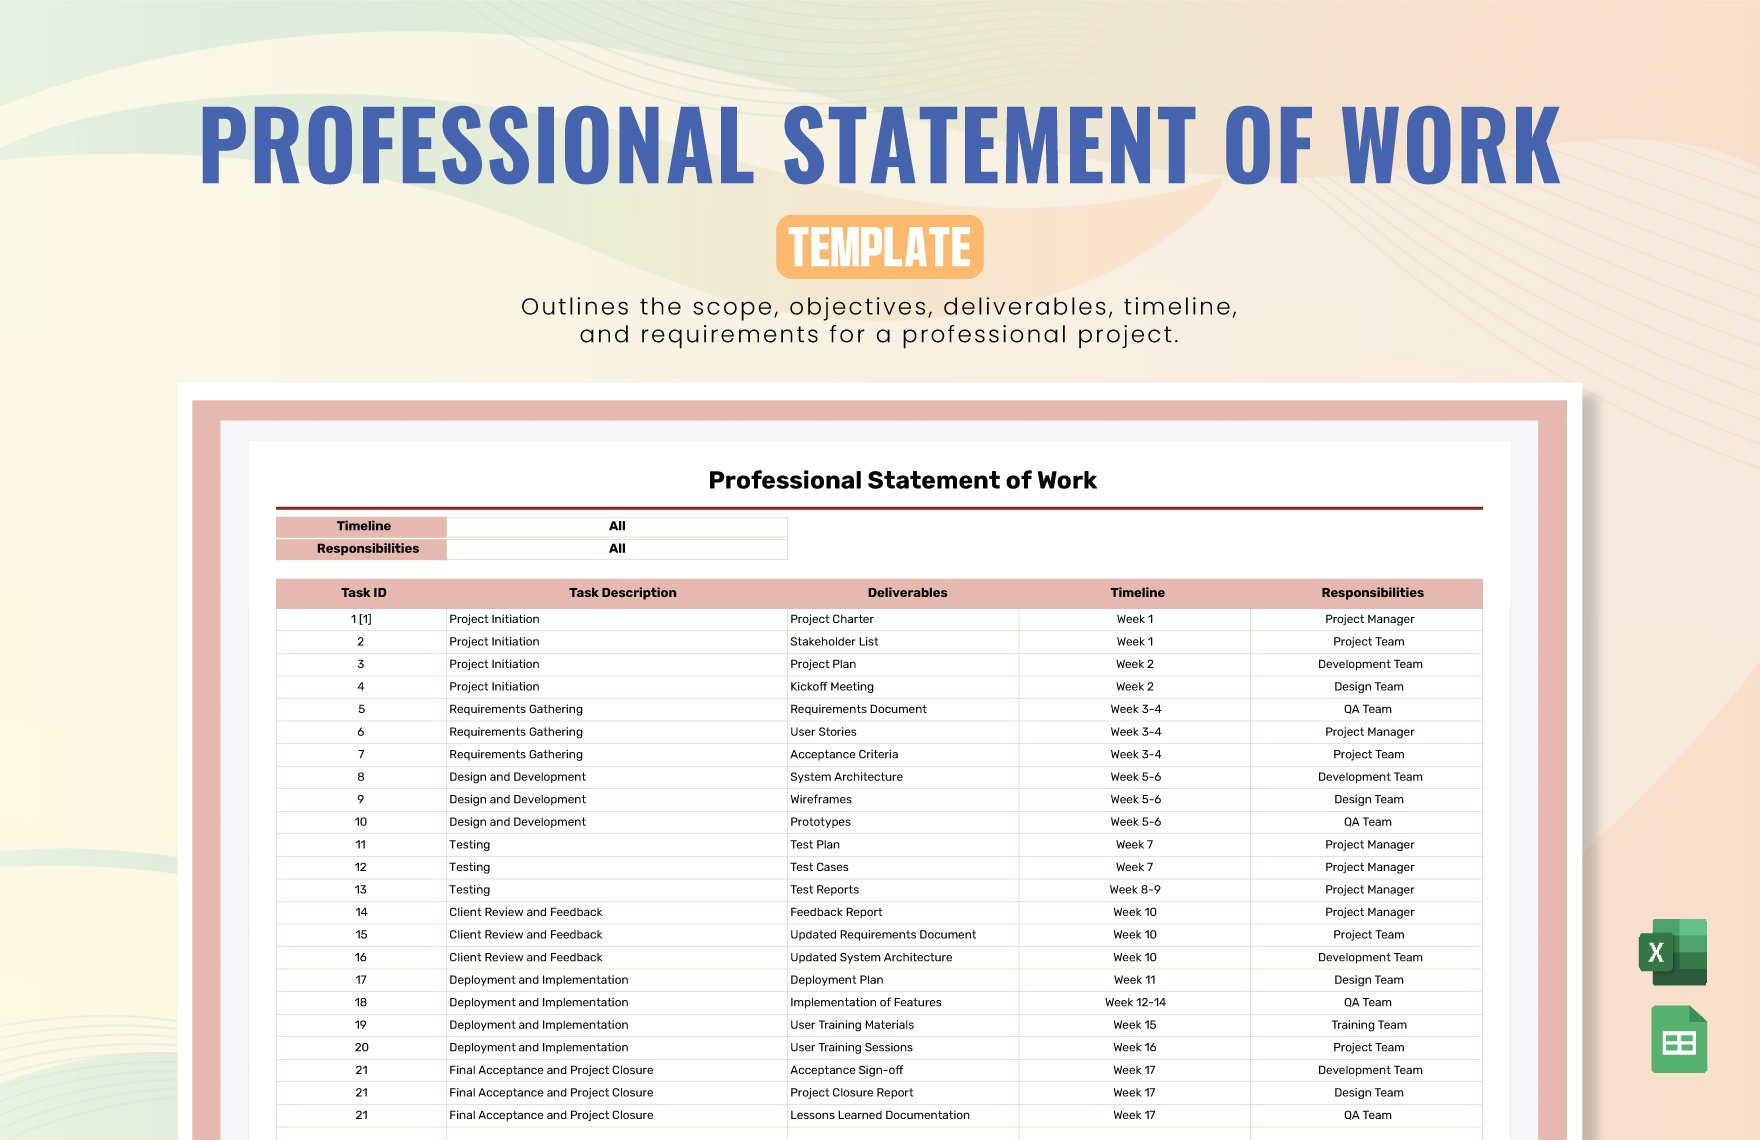 Professional Statement of Work Template in Excel, Google Sheets